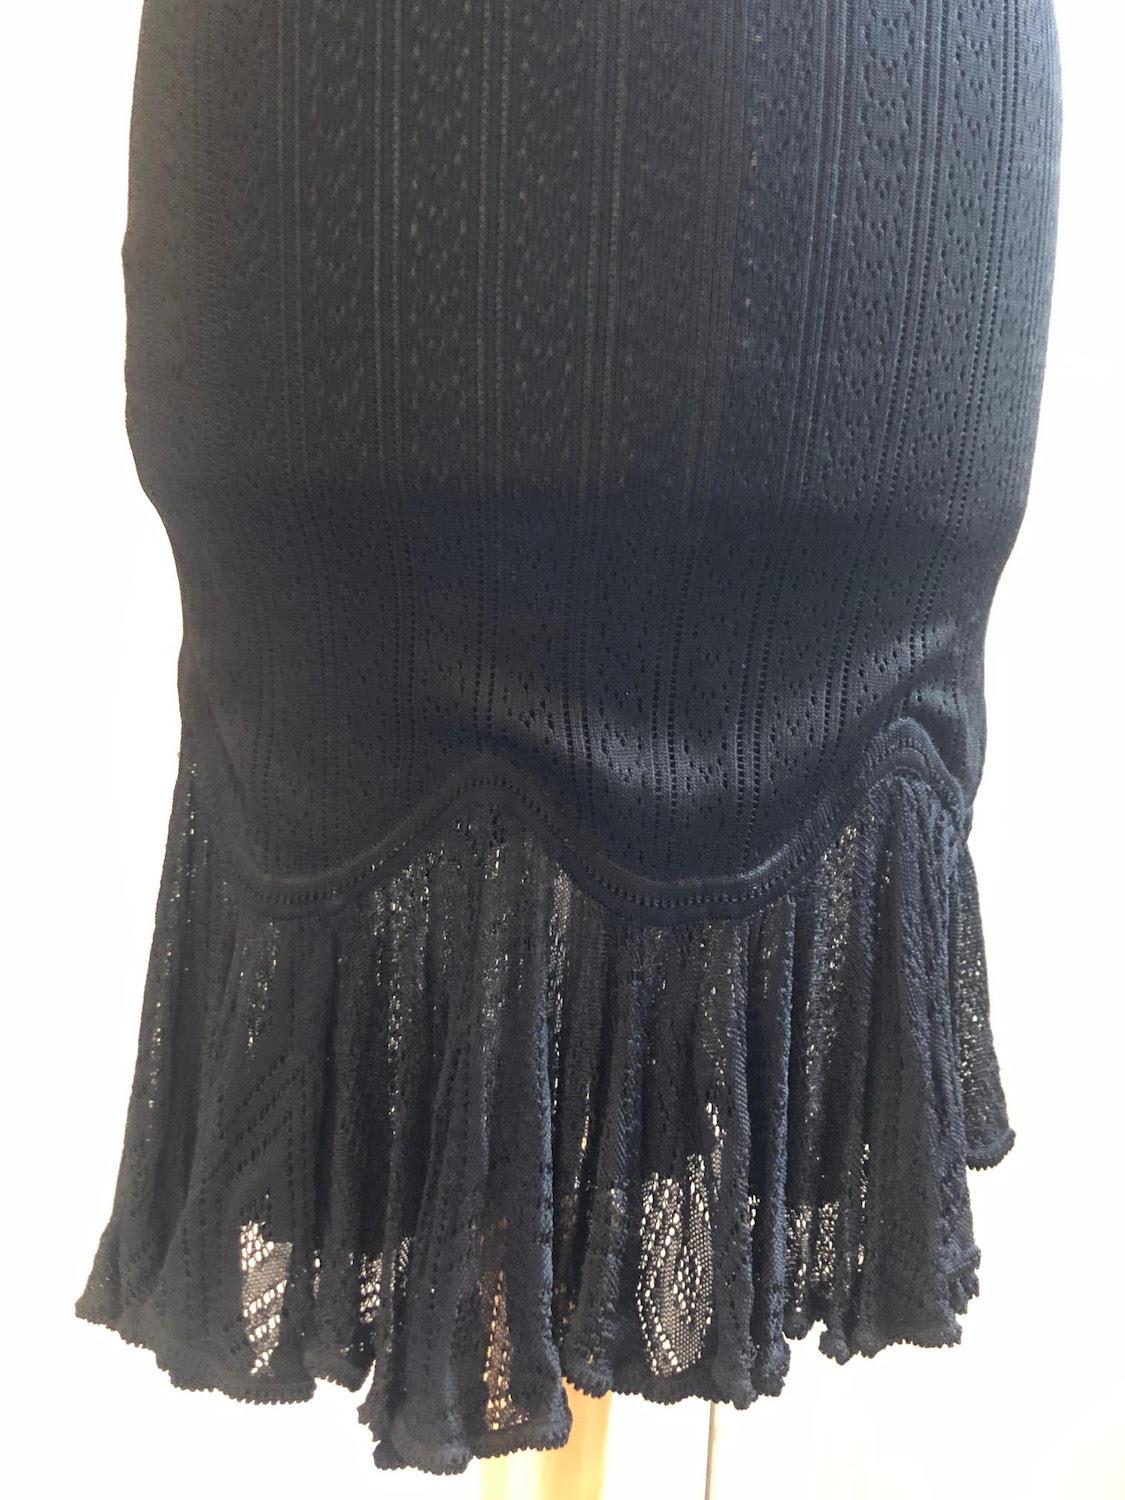 JOHN GALLIANO Black Knitted Lace Evening Mid Length Dress C.1998 For Sale 3